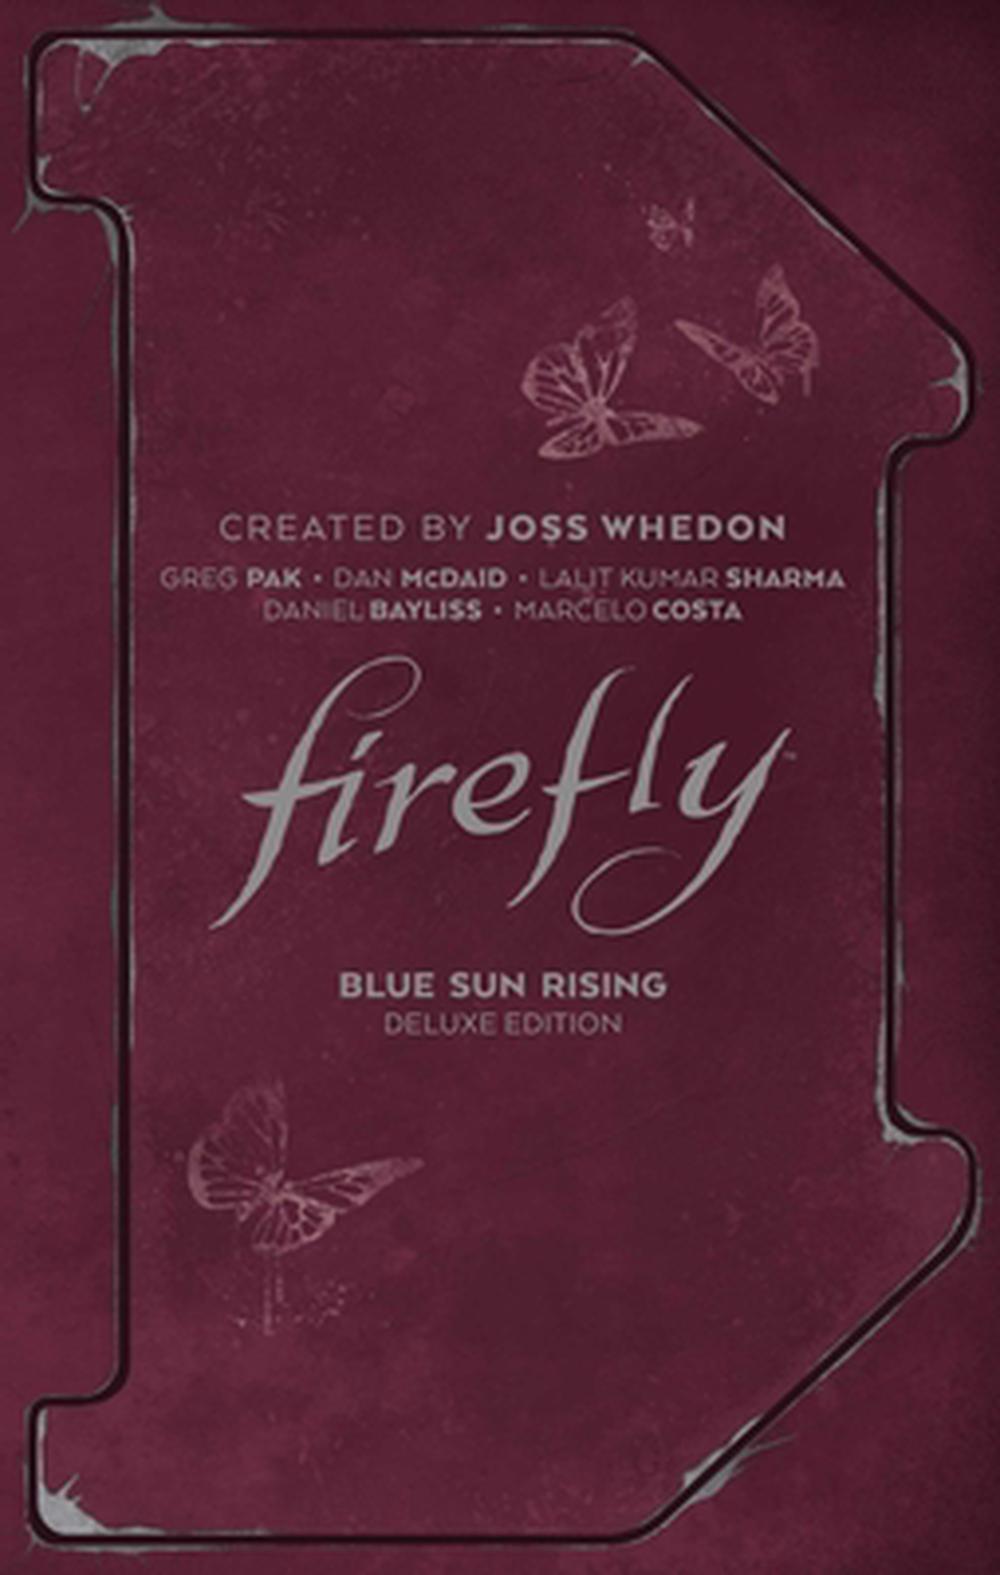 Firefly: Blue Sun Rising Deluxe Edition by Greg Pak (English) Hardcover Book